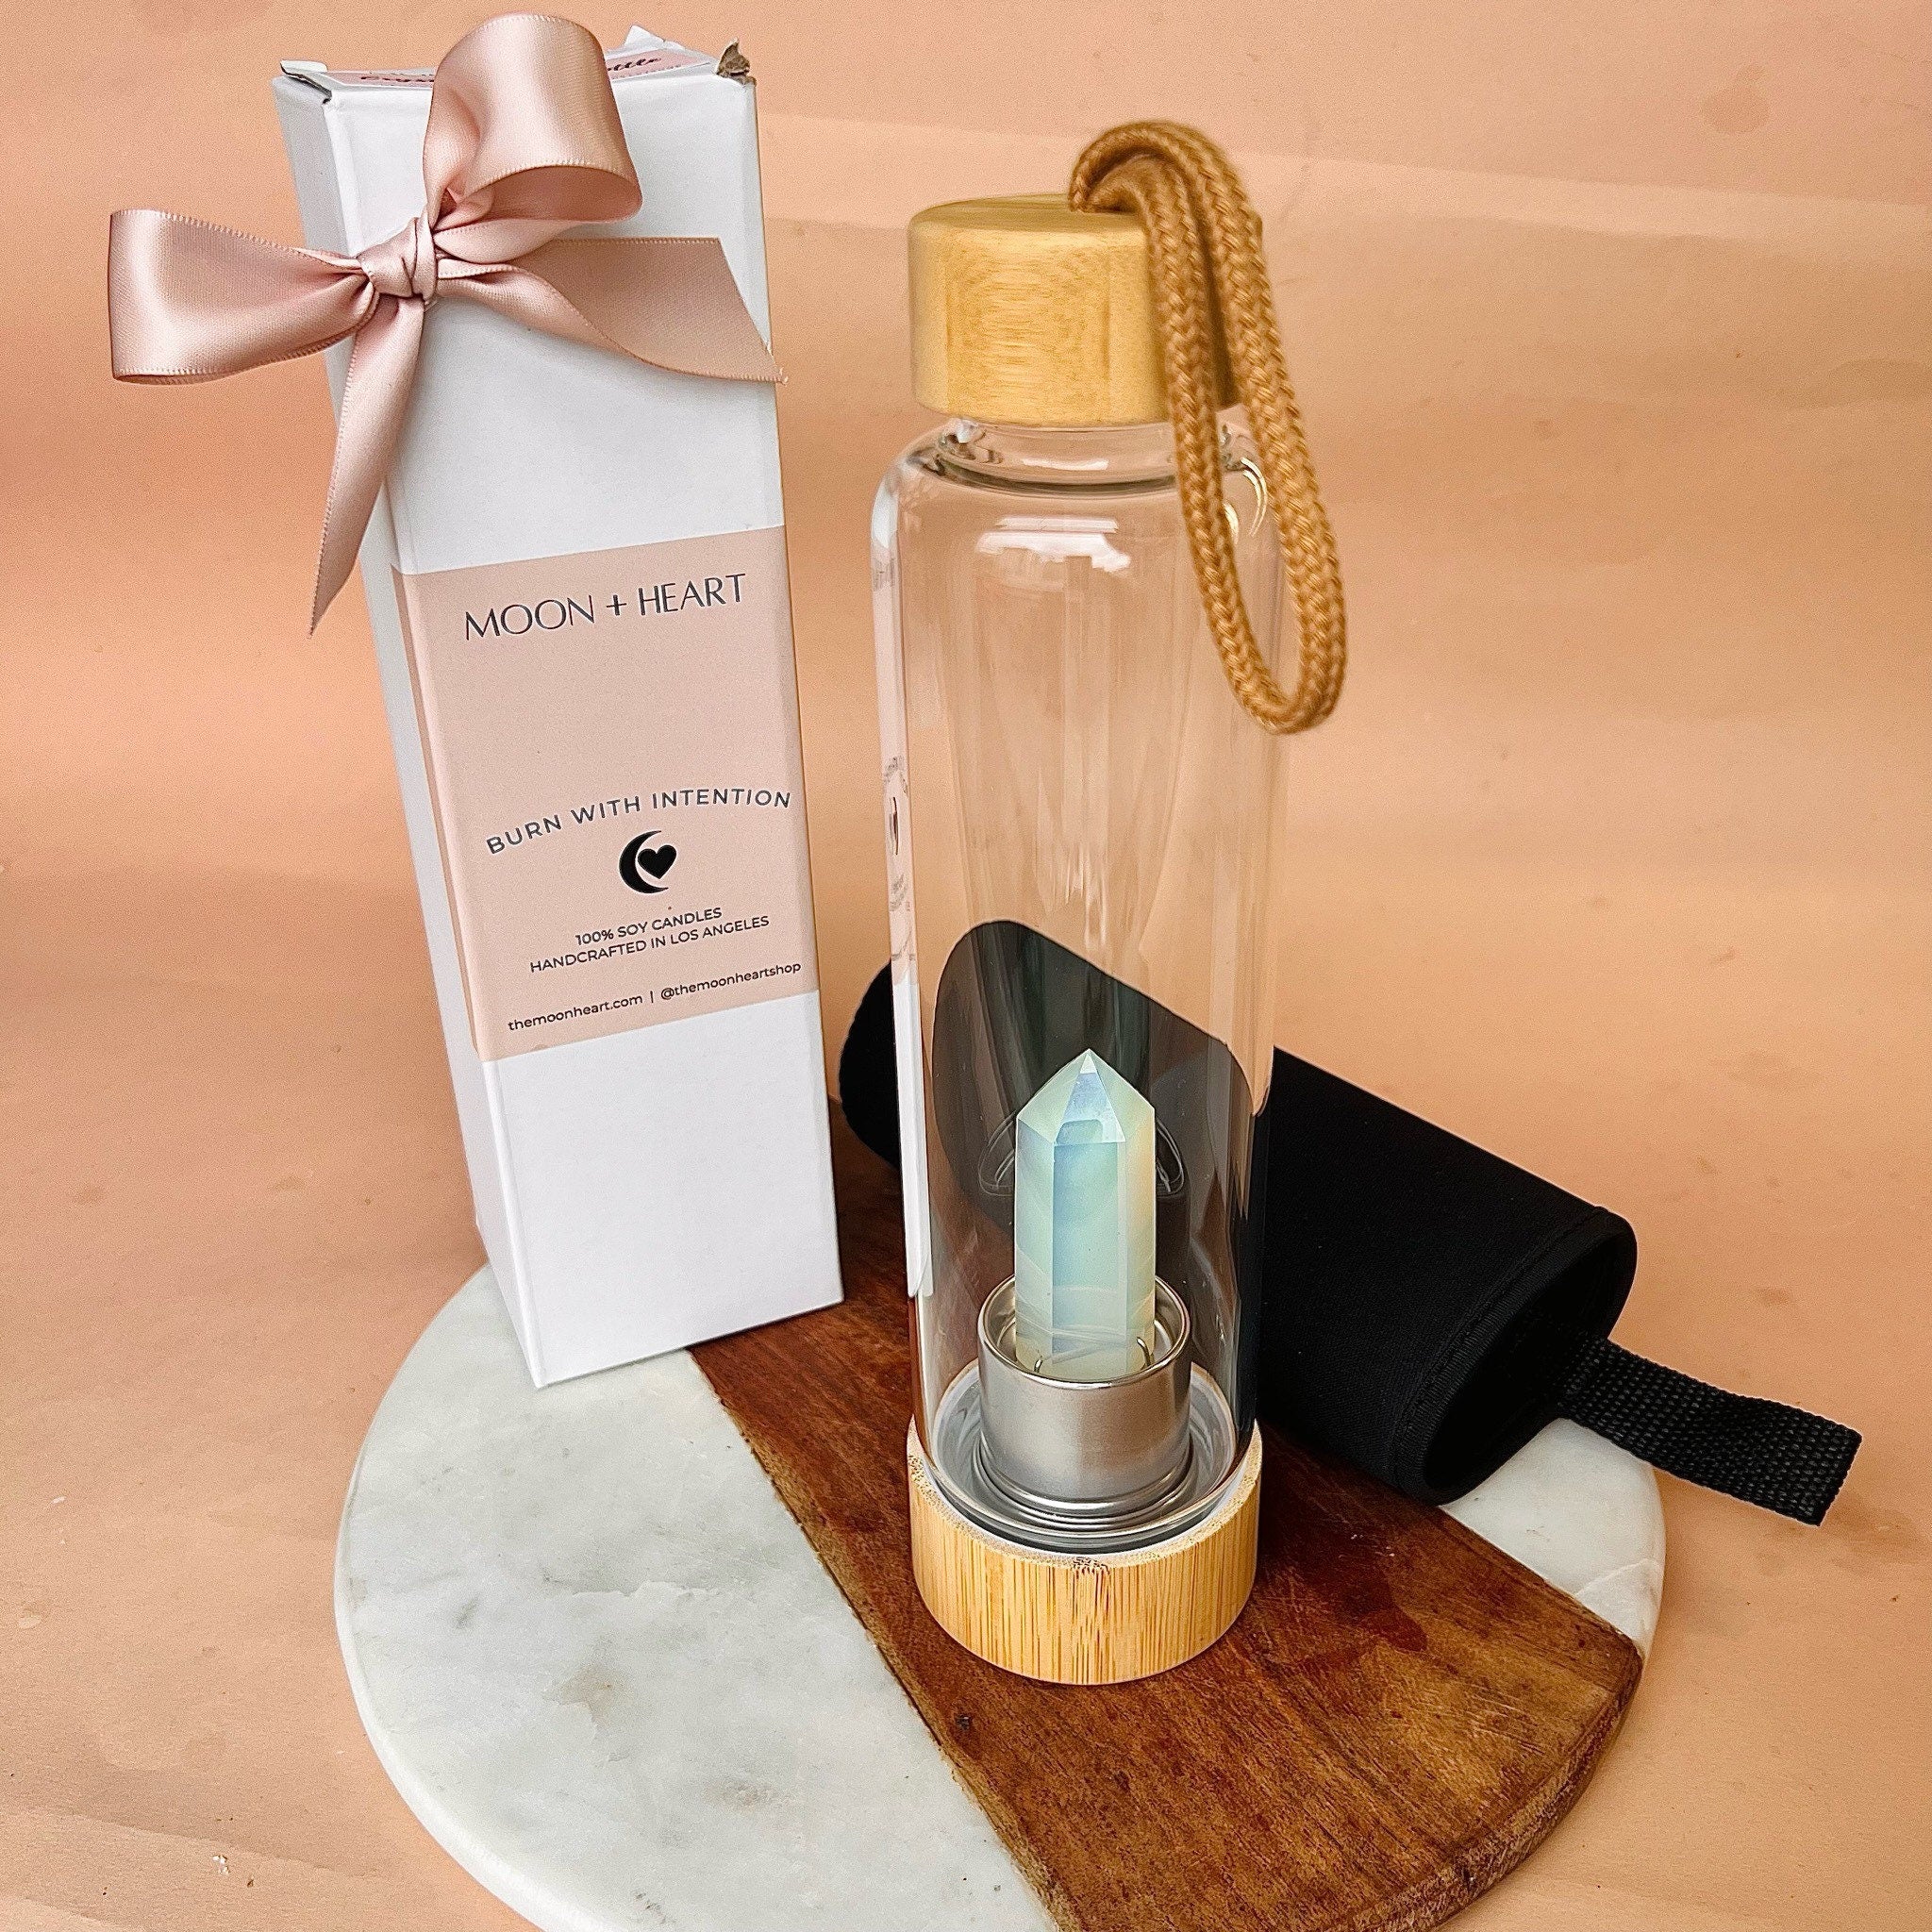 Lemuria Crystal Water Bottle with Crystal Chamber